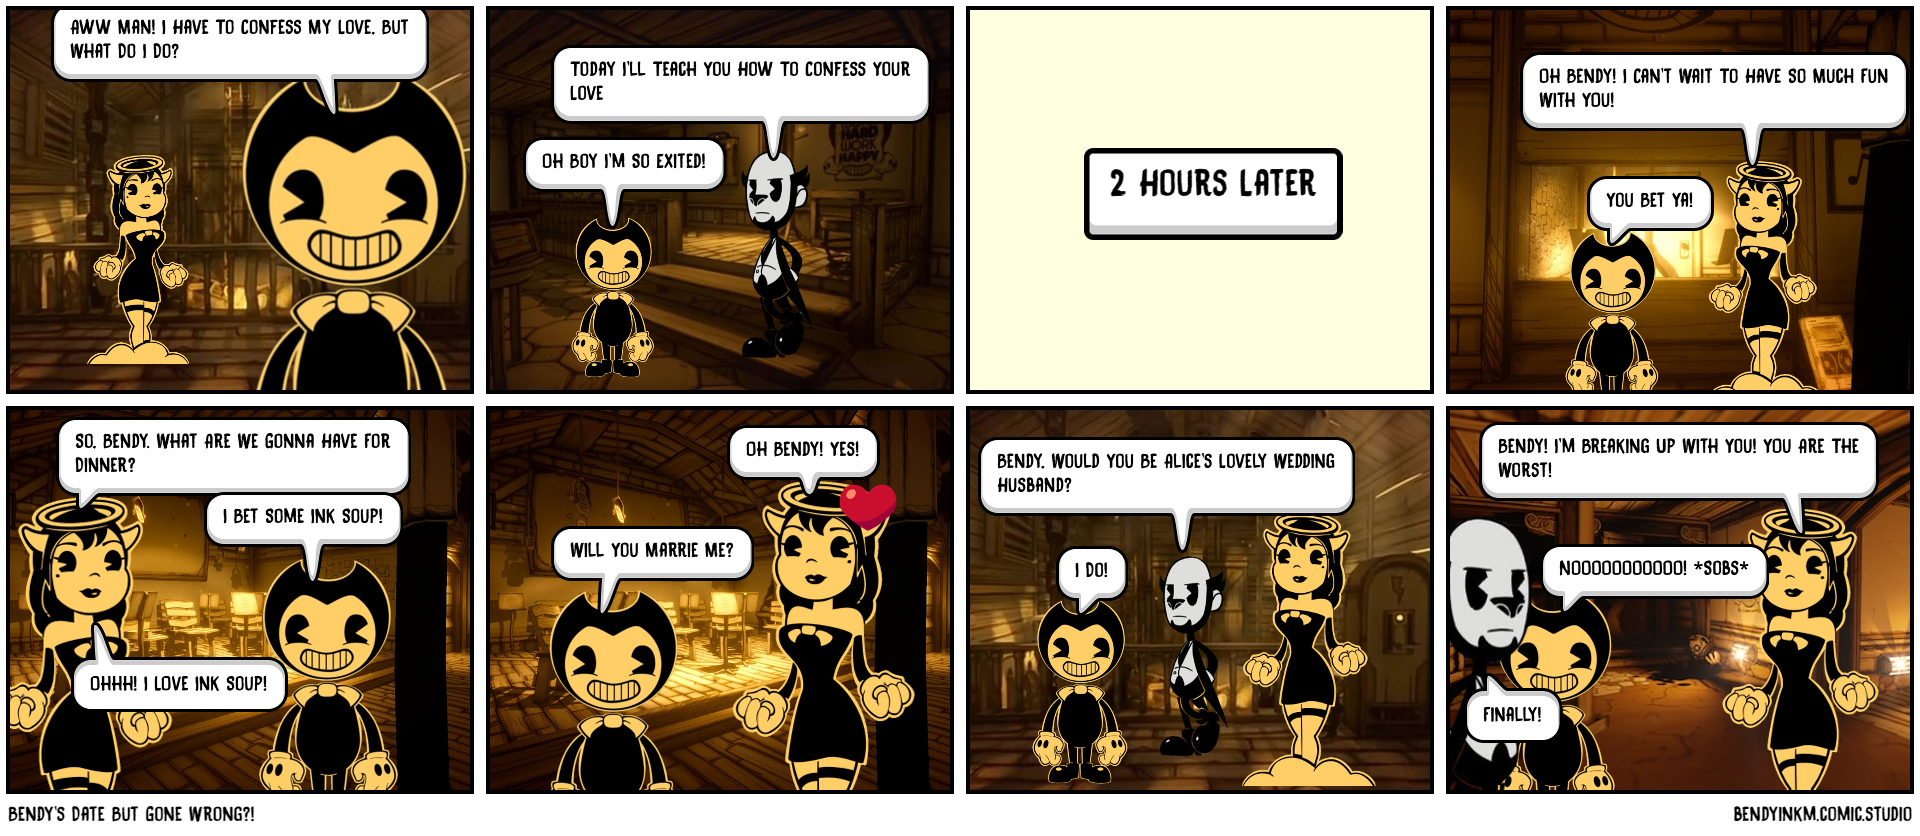 Bendy's Date But Gone Wrong?!